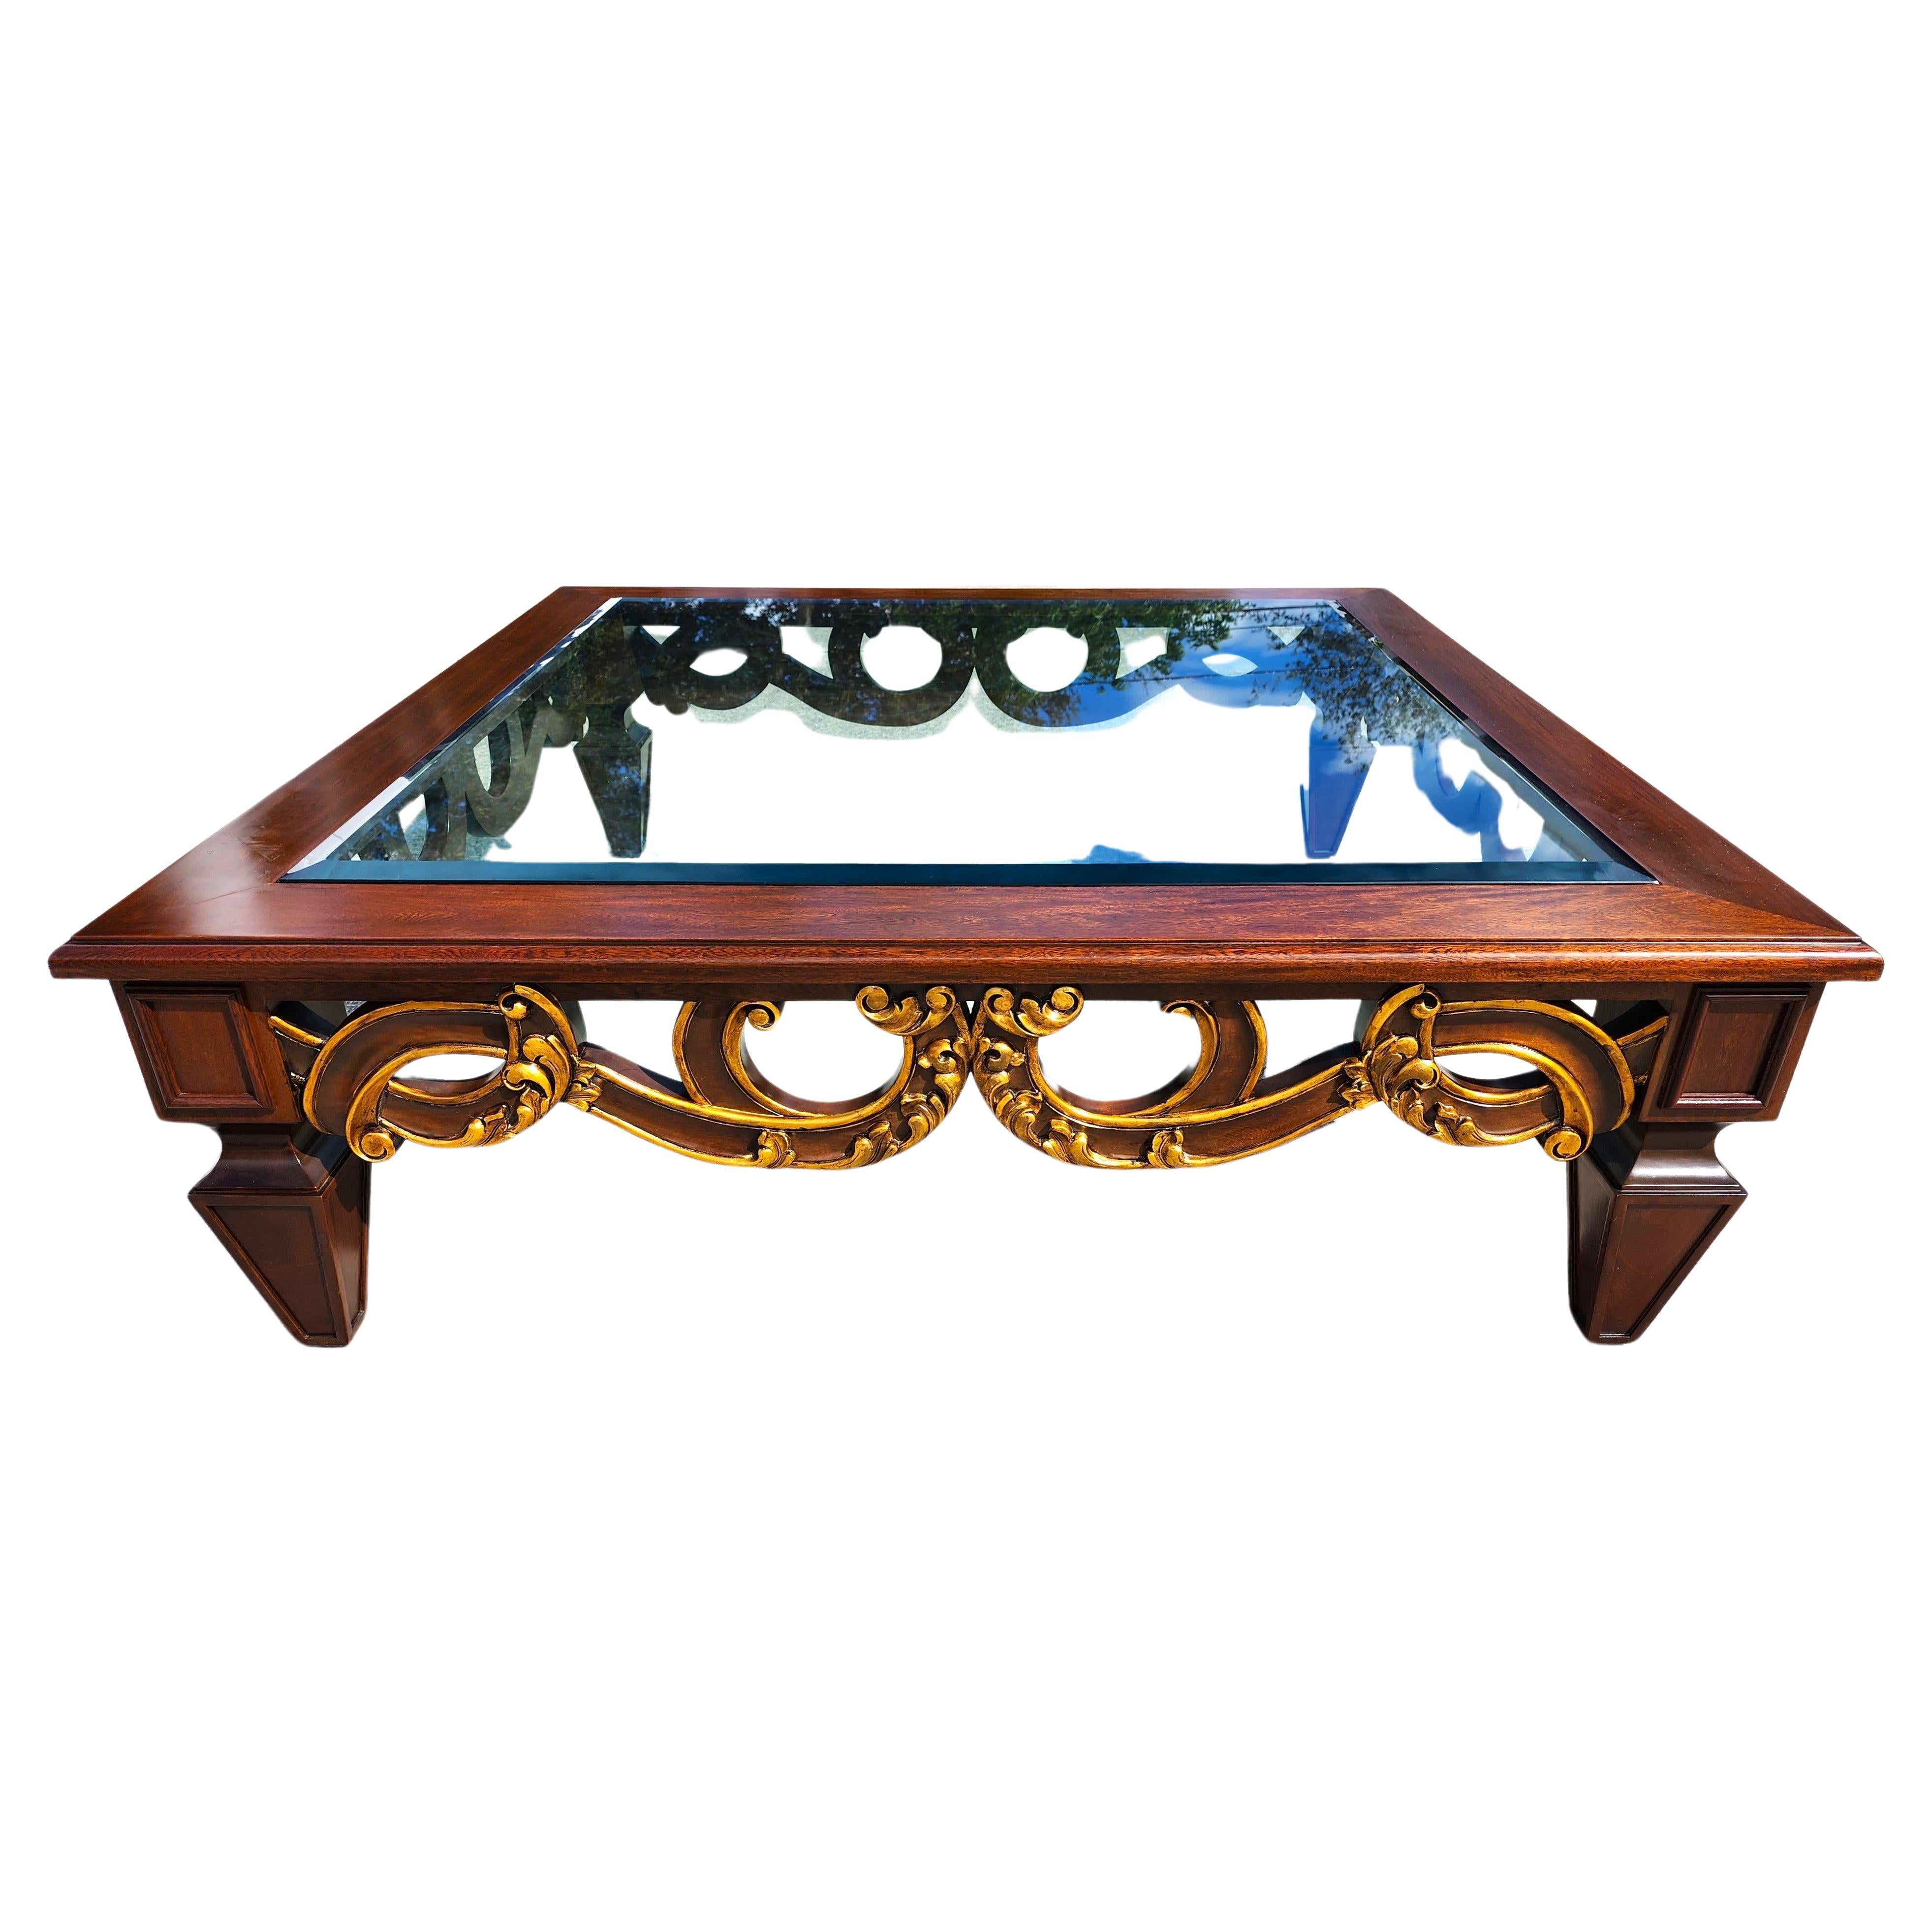 Vintage French Provincial Coffee Table Huge 5 Foot For Sale